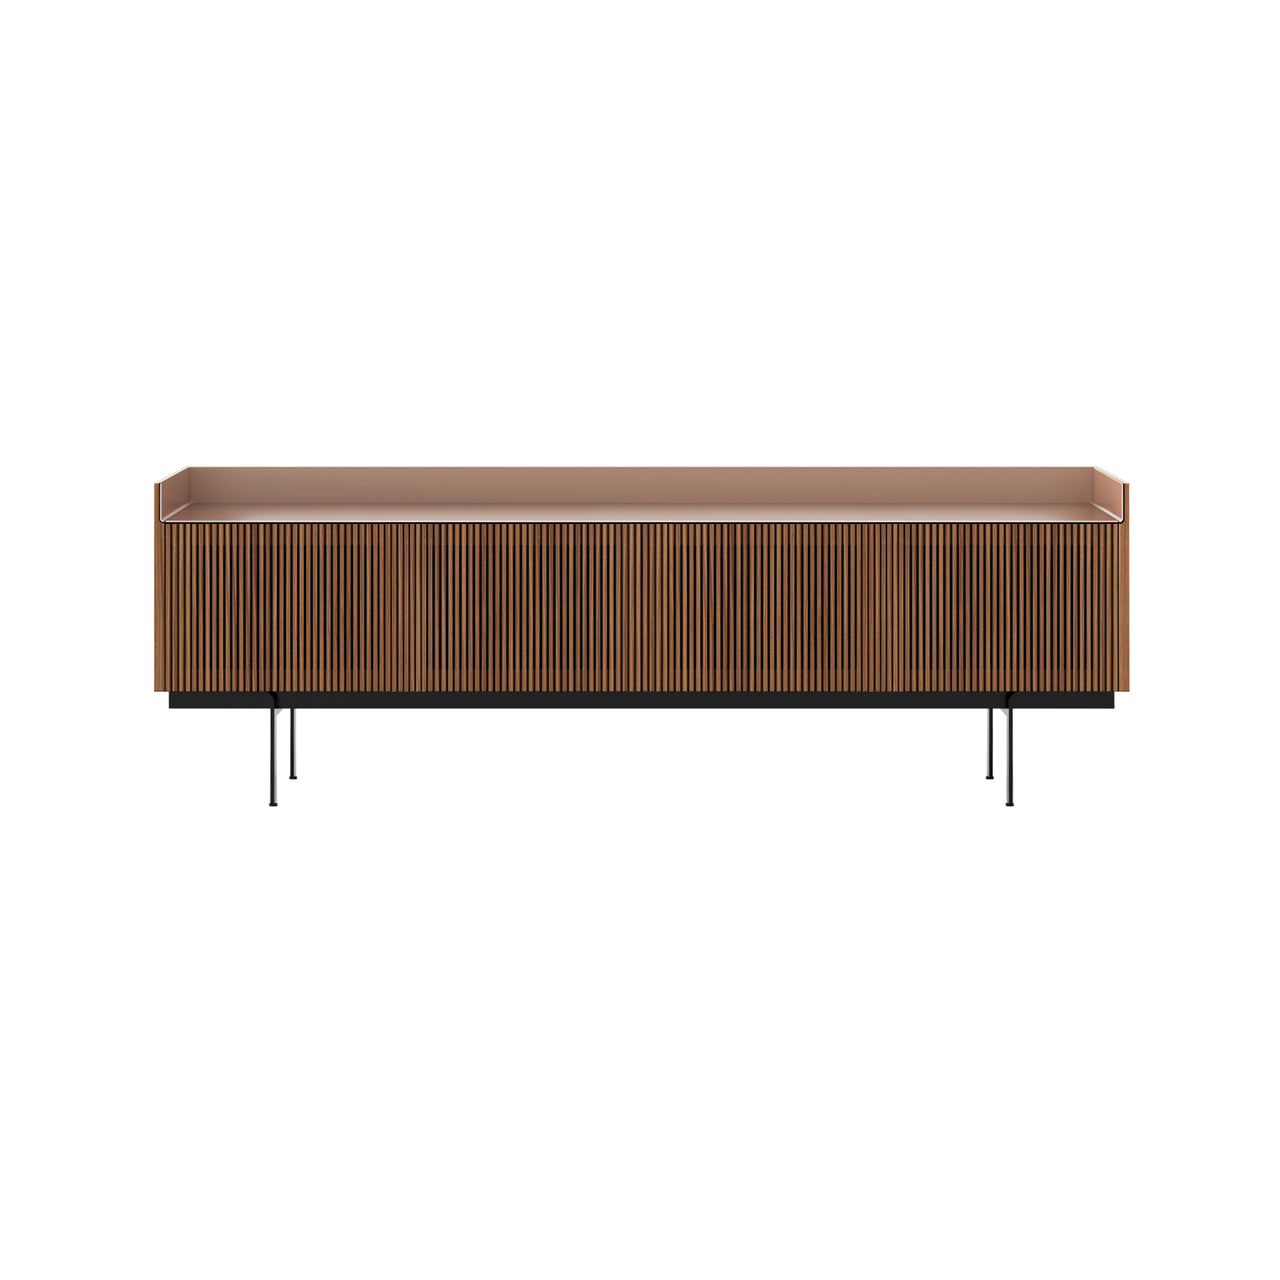 Stockholm Technic Sideboard: STH404 + Walnut Stained Walnut + Anodized Aluminum Pale Rose + Black